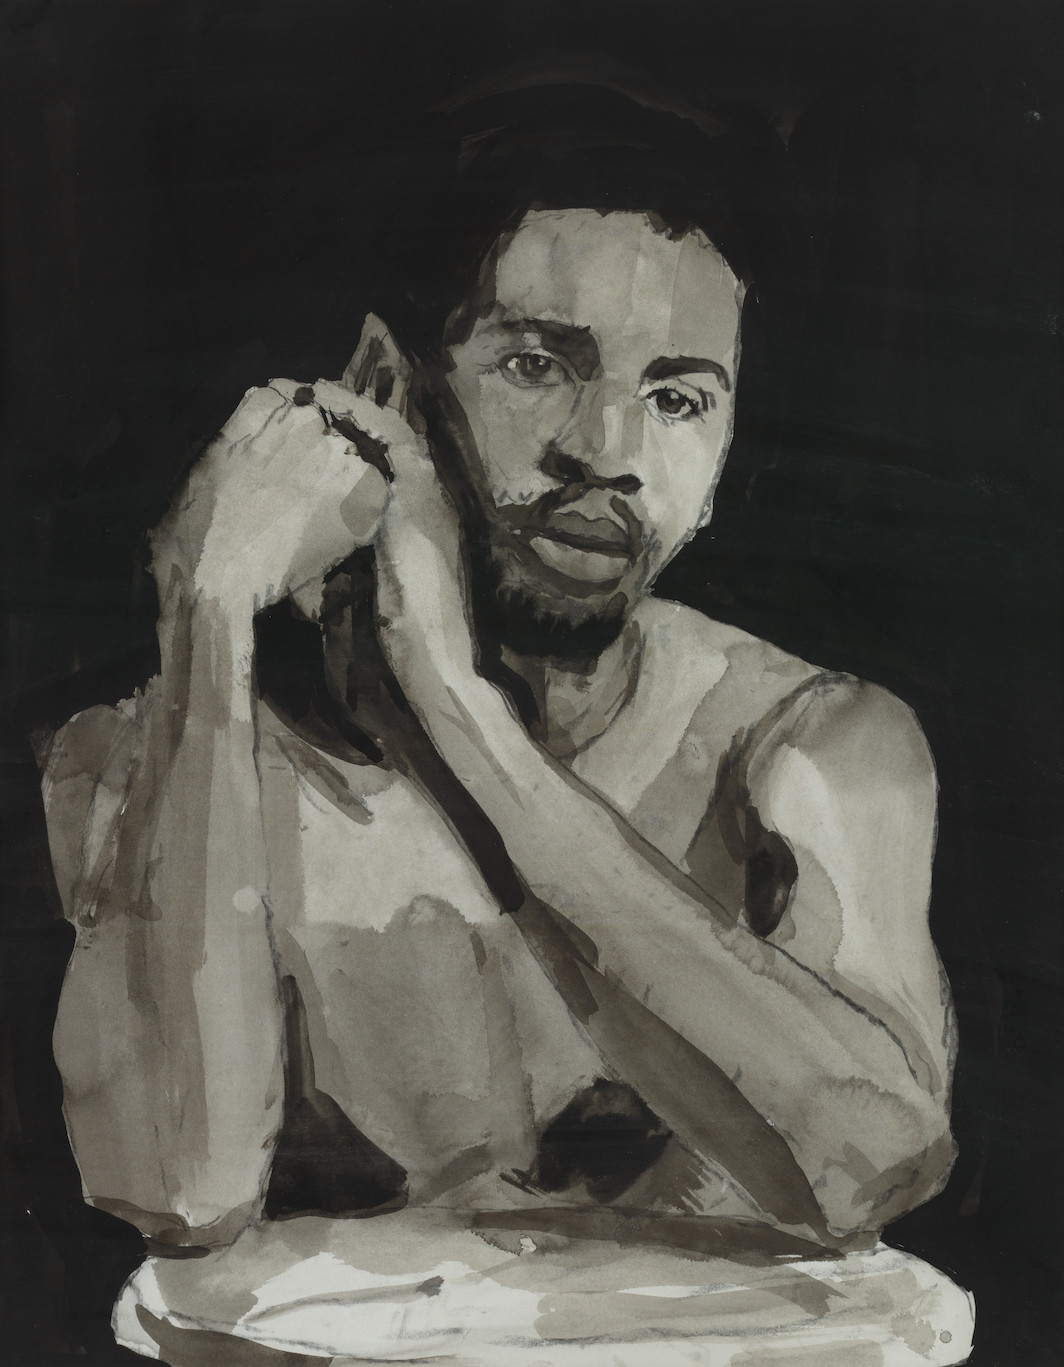 Darrel Ellis, Self-Portrait after Photograph by Robert Mapplethorpe, 1989, ink and wash on paper, 30 × 23".Collection of George Steinberg/Courtesy Visual AIDS